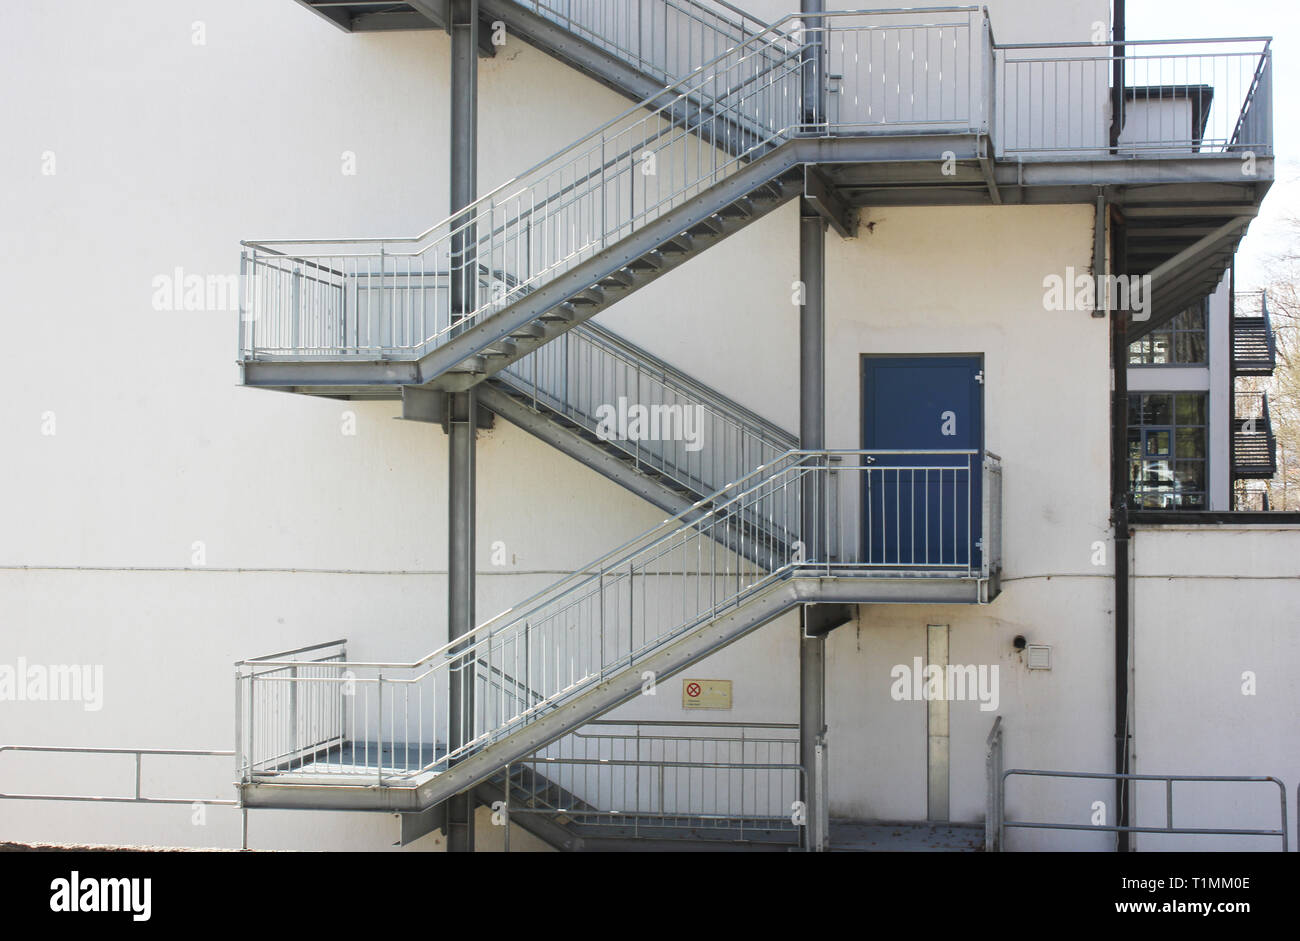 Fire exit staircase in front of white housewall. Stock Photo